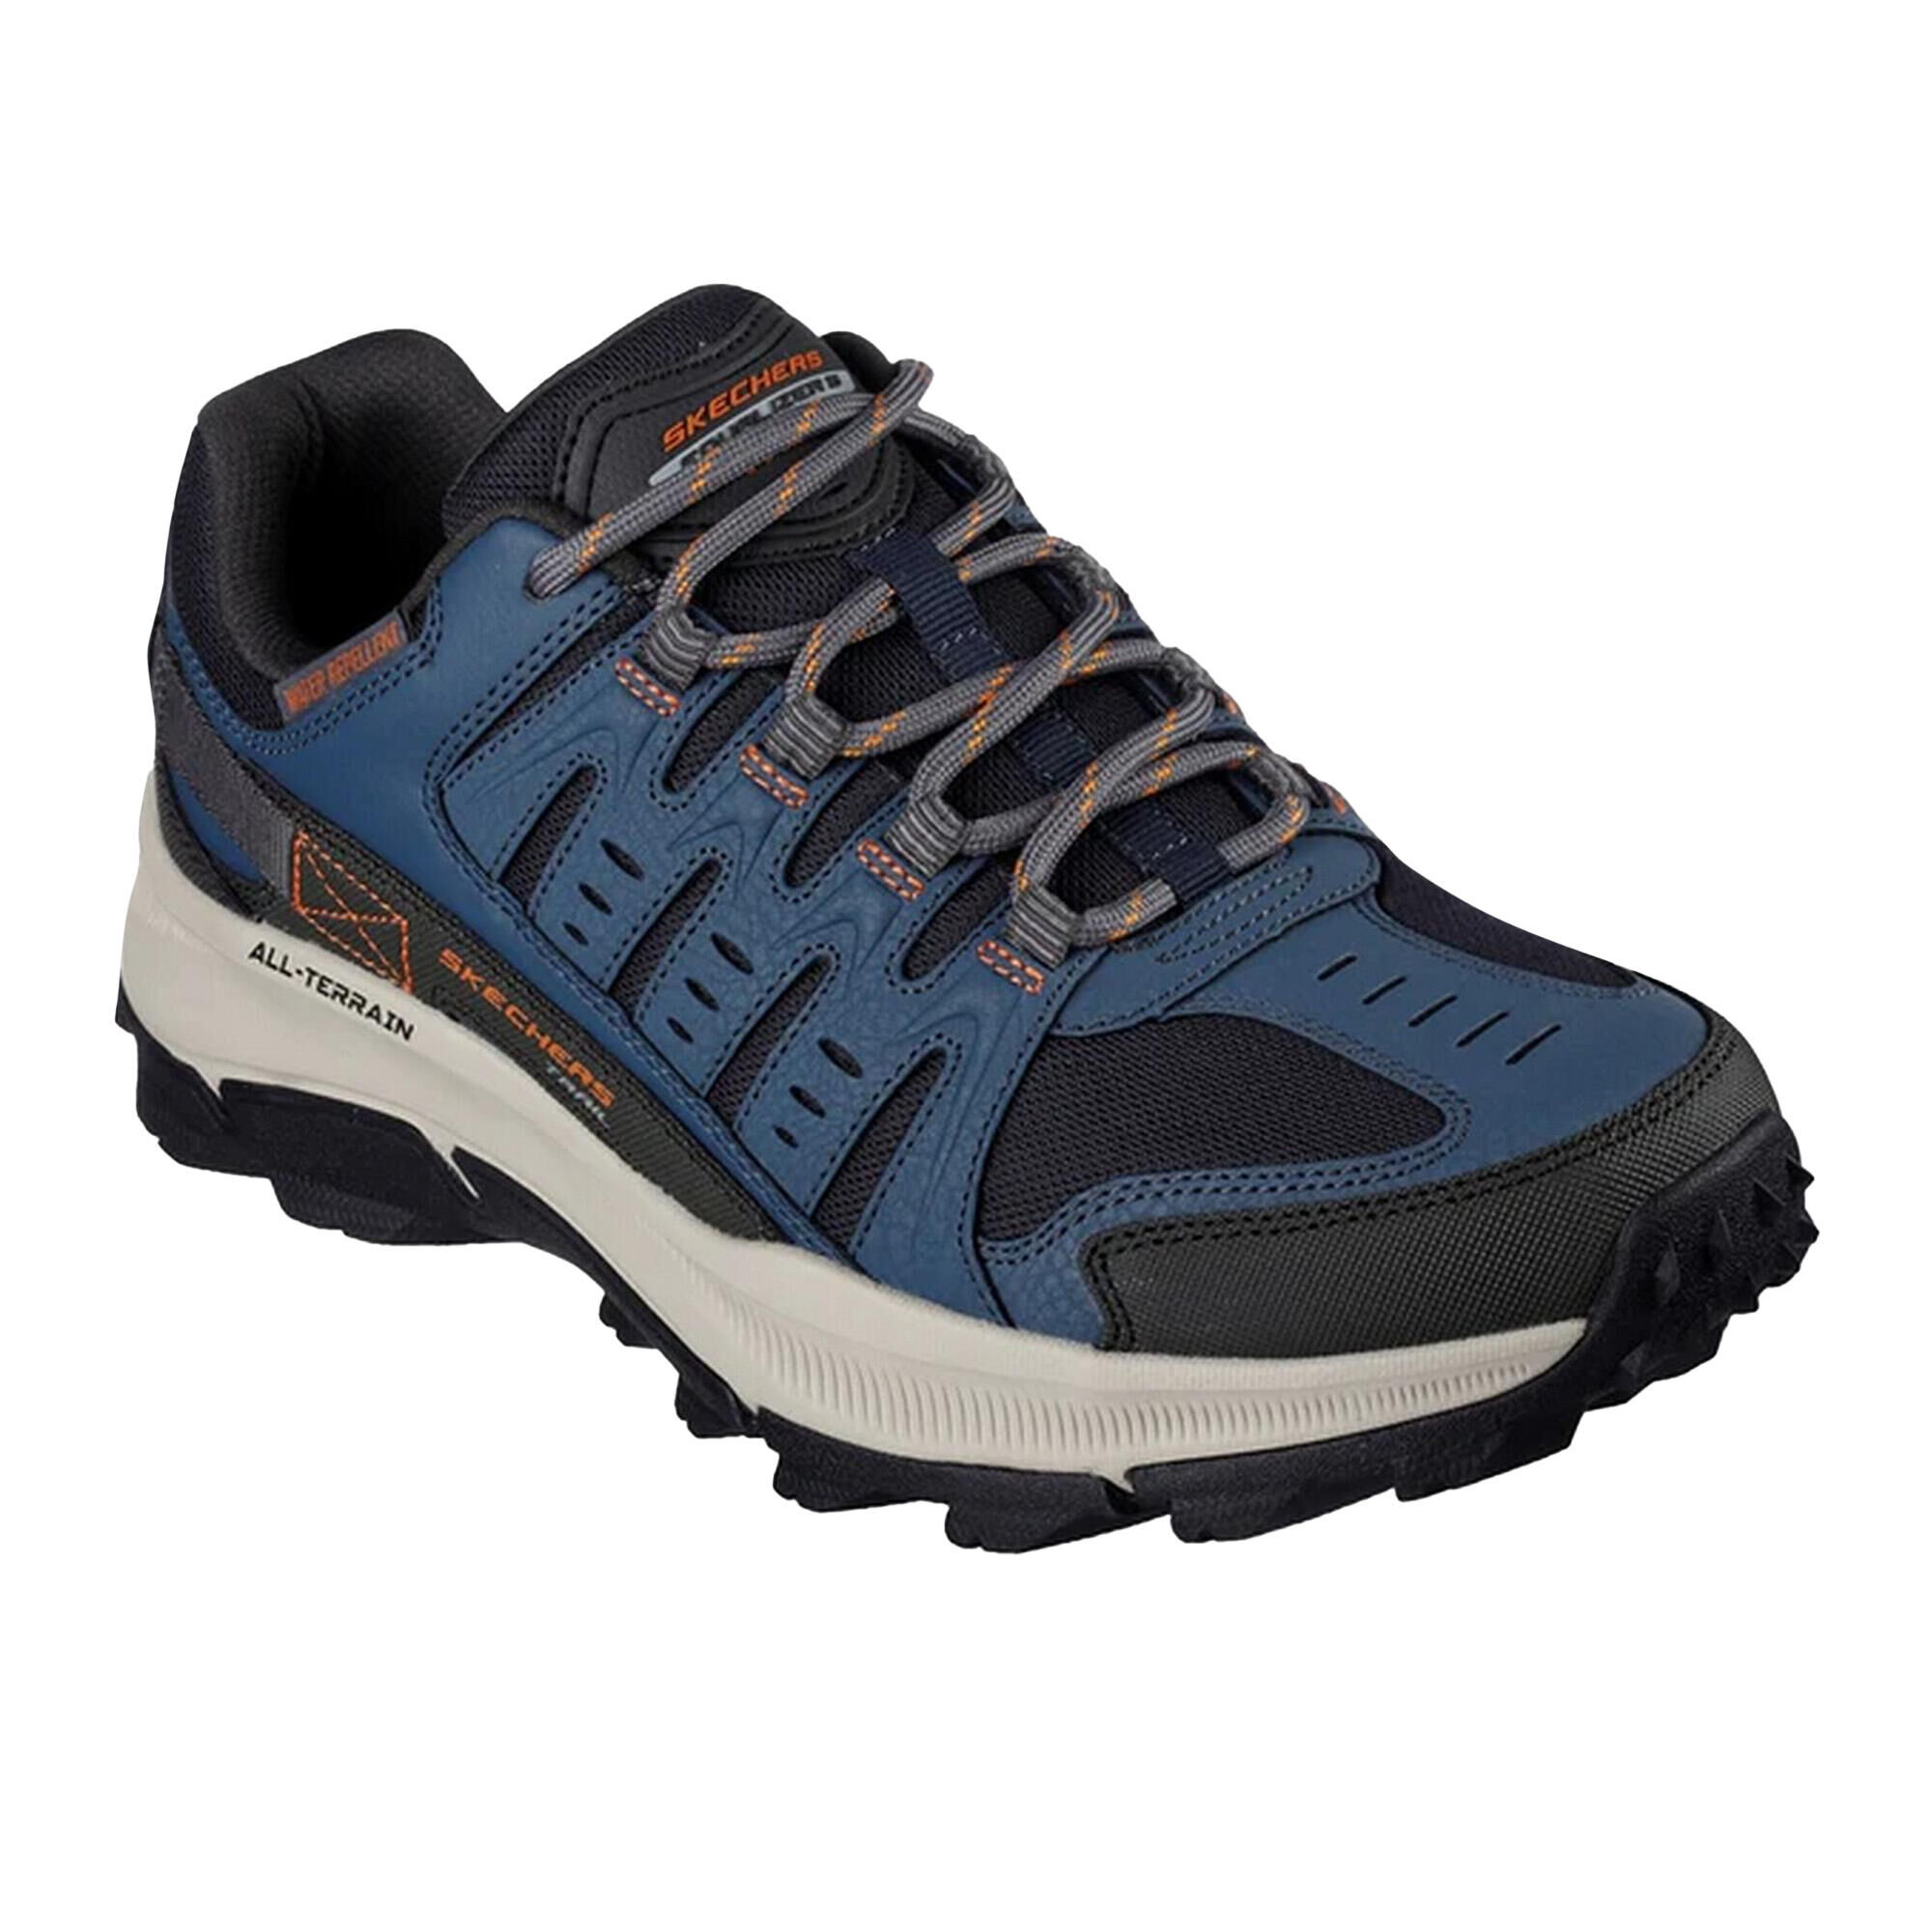 SKECHERS Mens Equalizer 5.0 Trail Solix Leather Trainers (Navy/Orange)